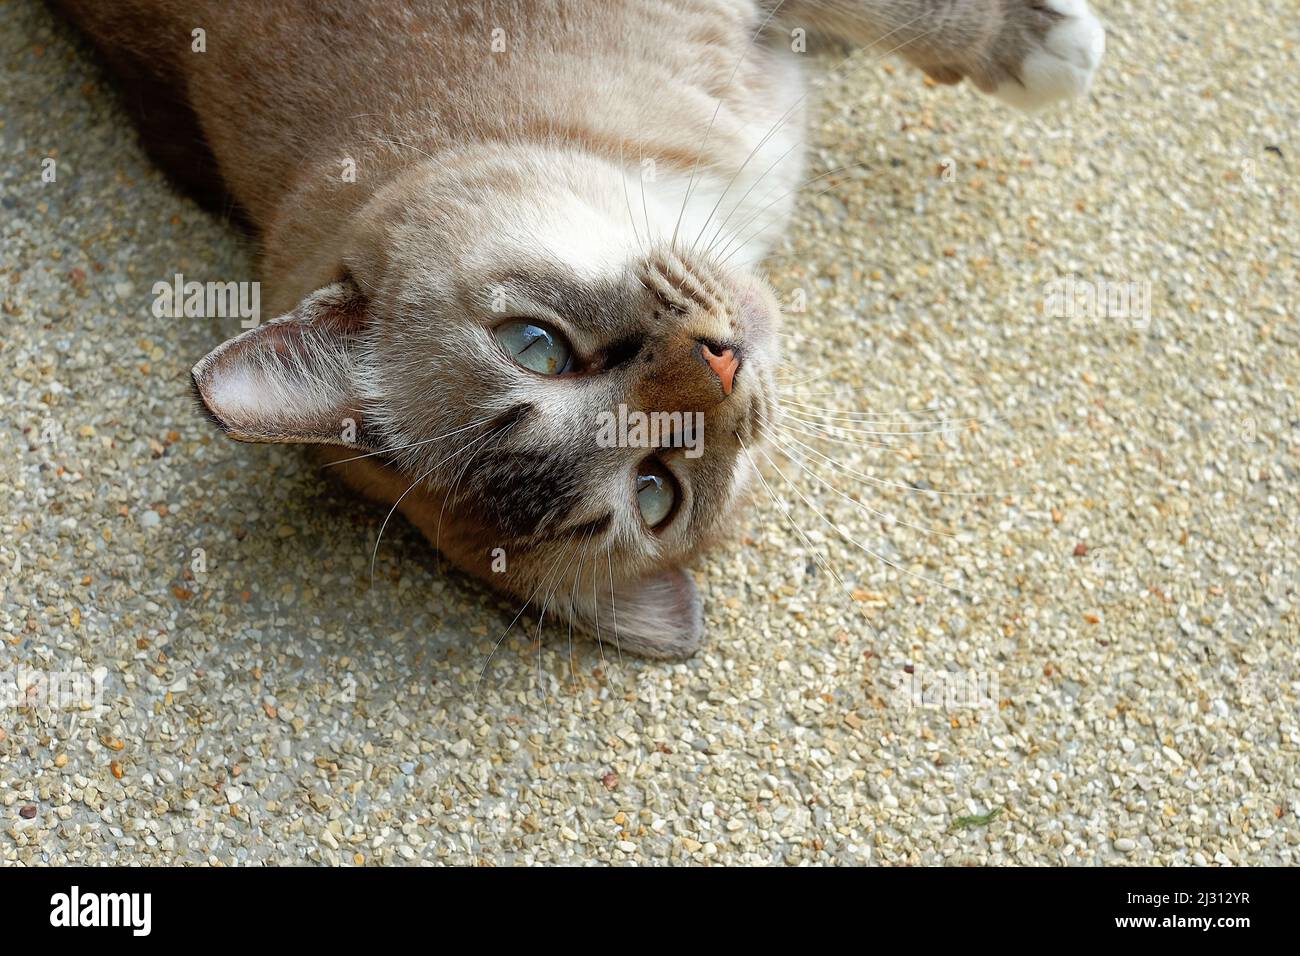 A stray Singapura cat playing and rolling on the ground Stock Photo